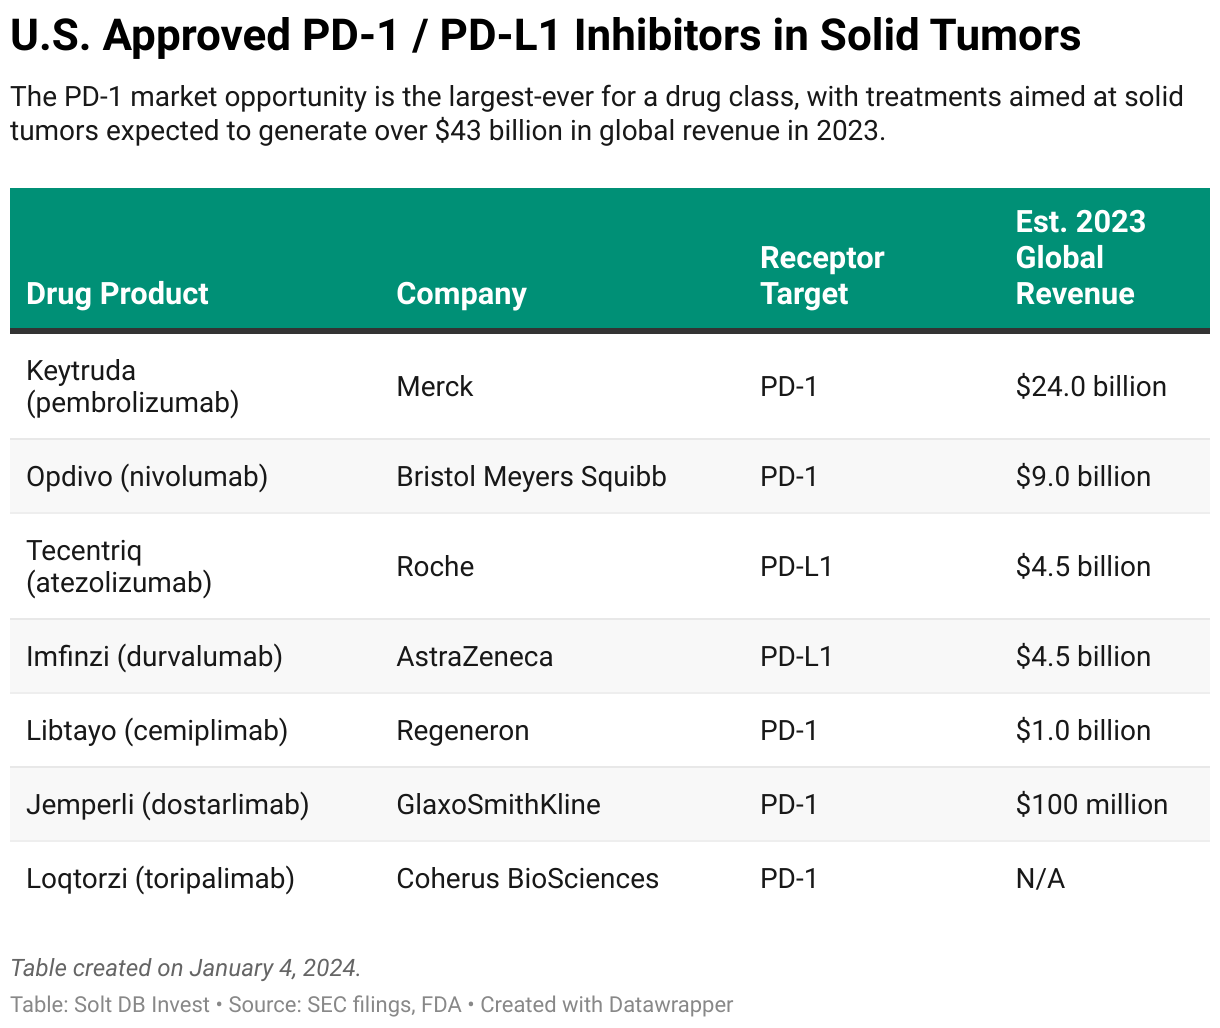 A table showing U.S. approved PD-1 or PD-L1 drug products, their scientific name, the company that owns the asset, the receptor target, and estimated 2023 global revenue.